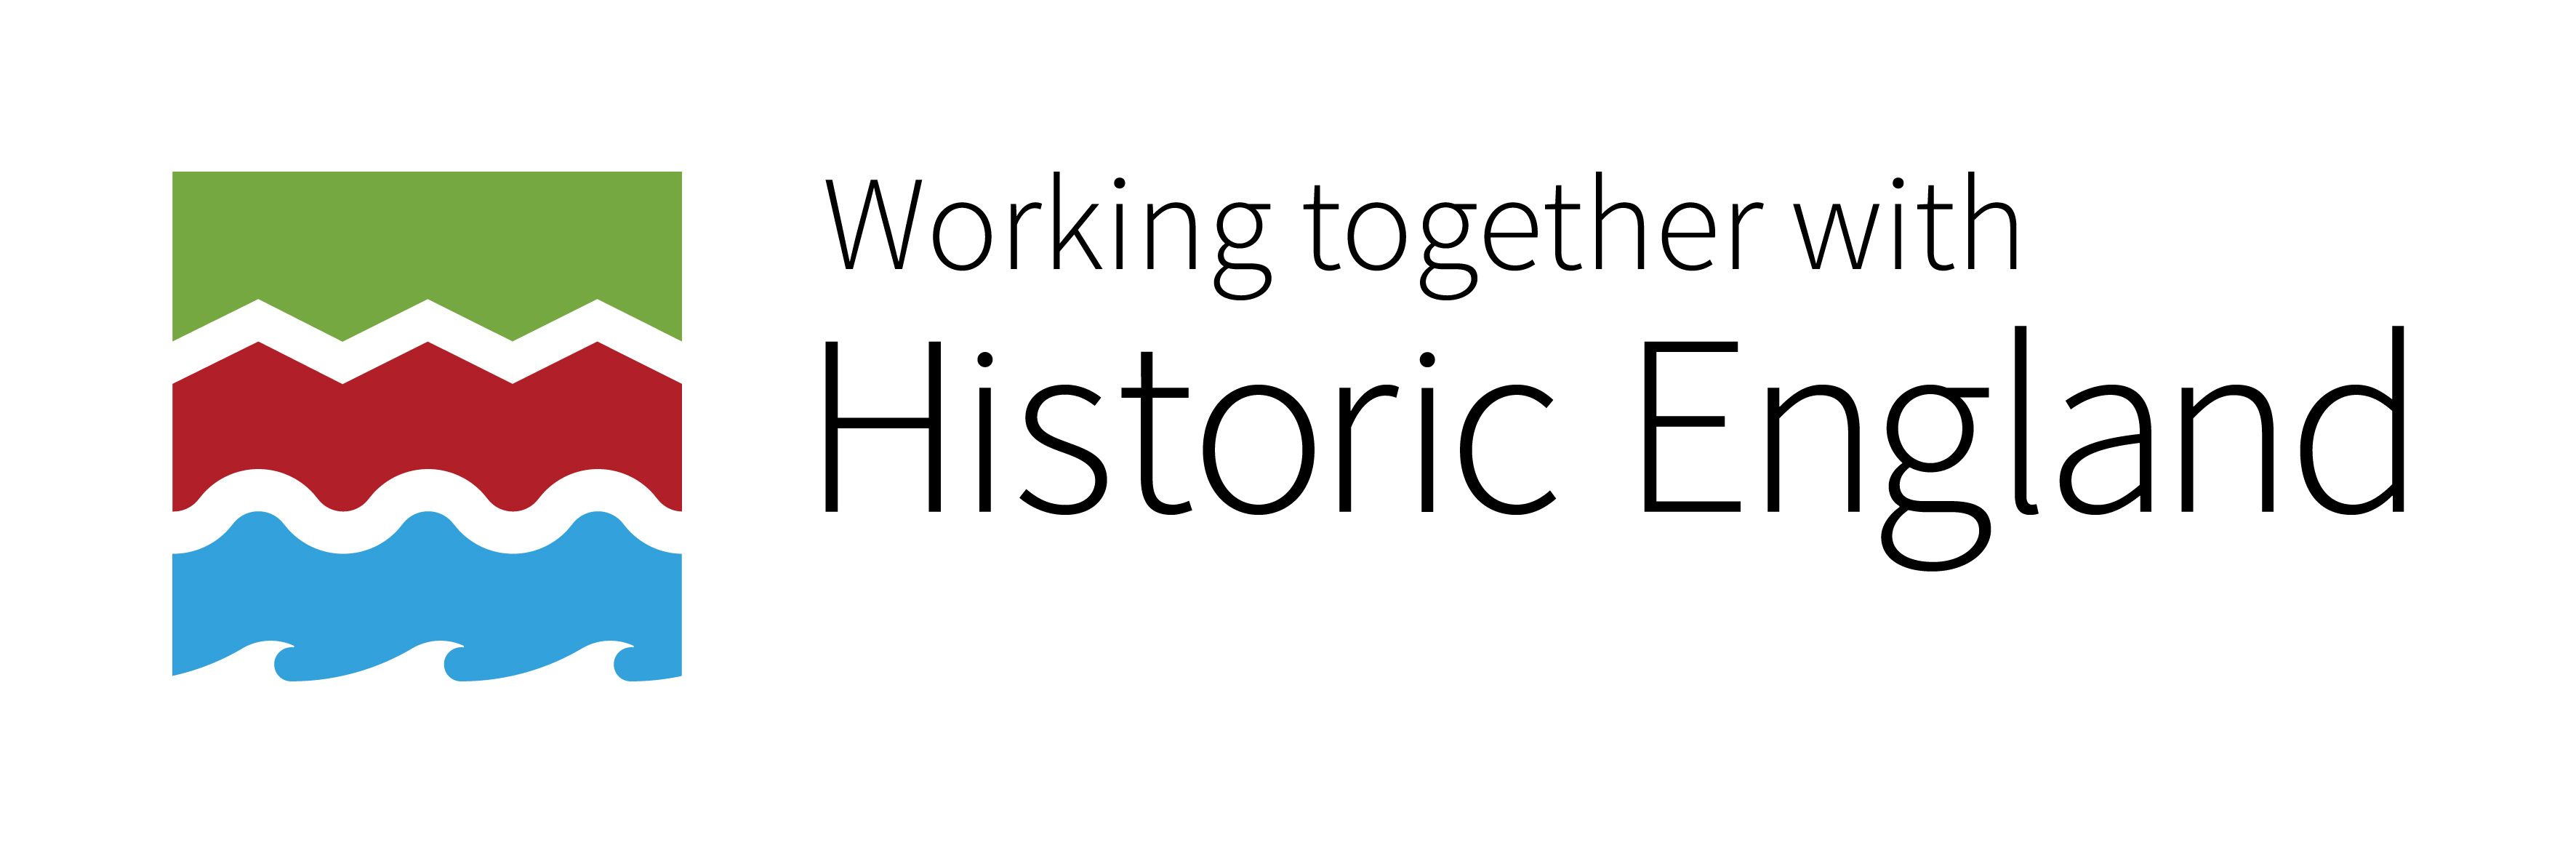 The Historic England logo in blue, red, and green, with the text 'Working together with Historic England'